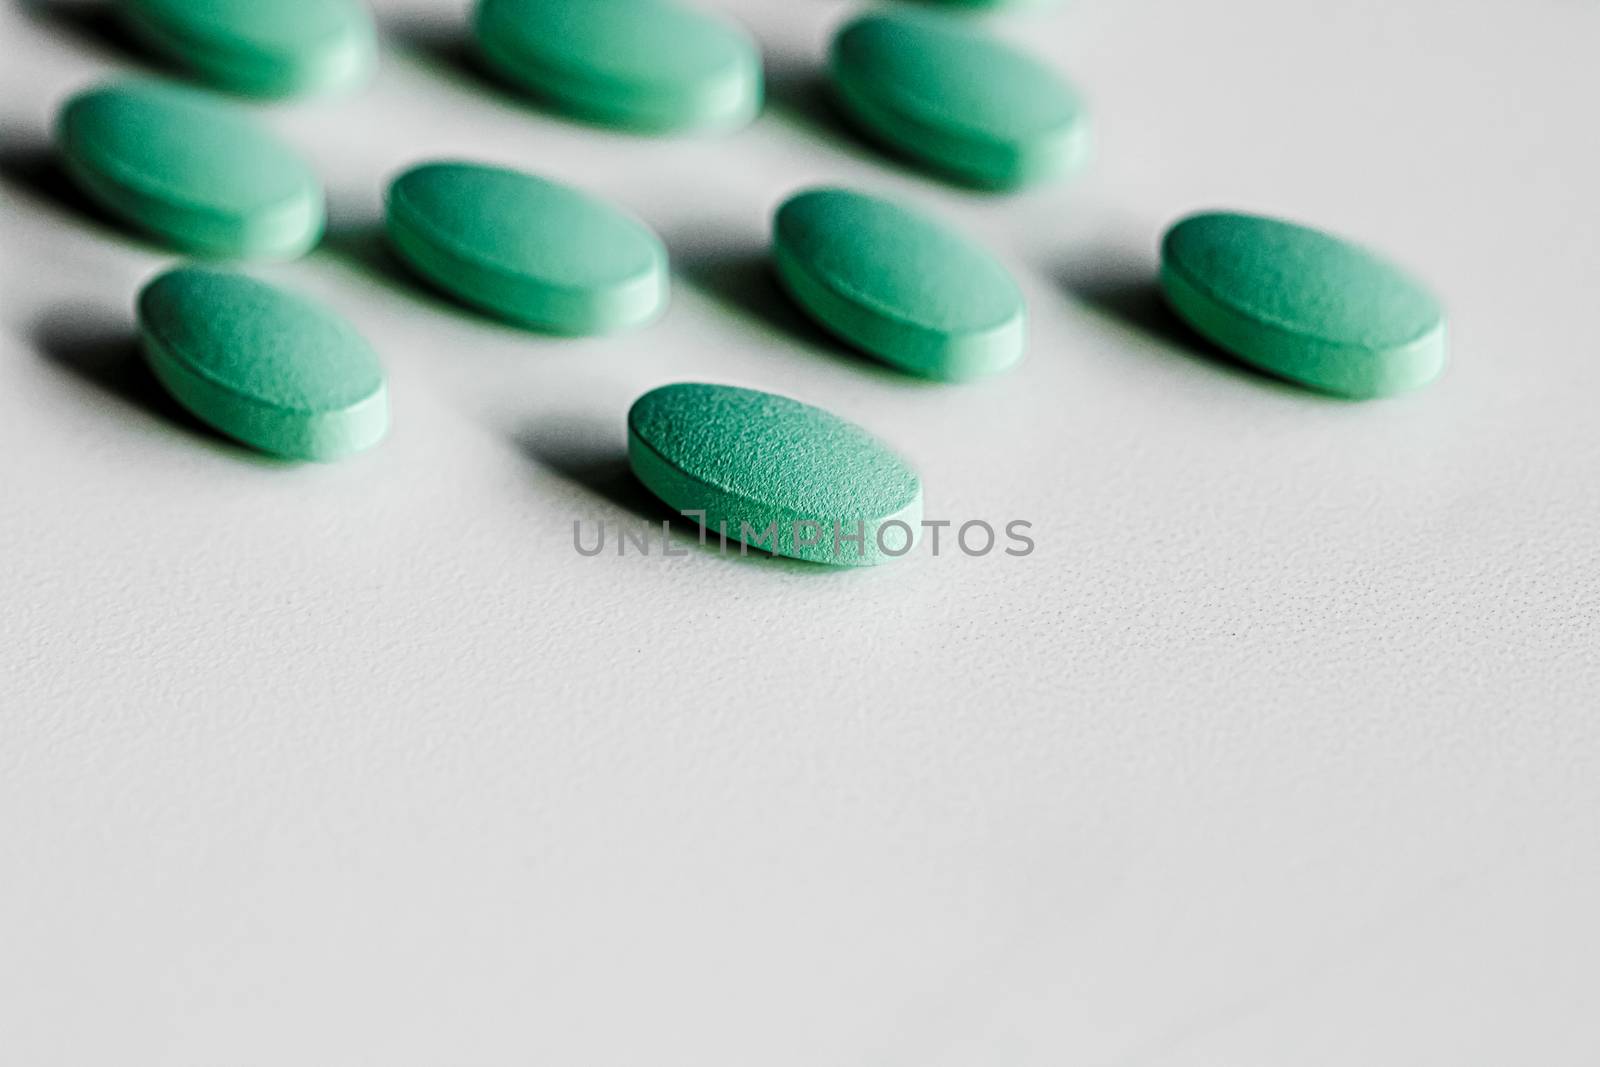 Mint pills as herbal medication, pharma brand store, probiotic d by Anneleven